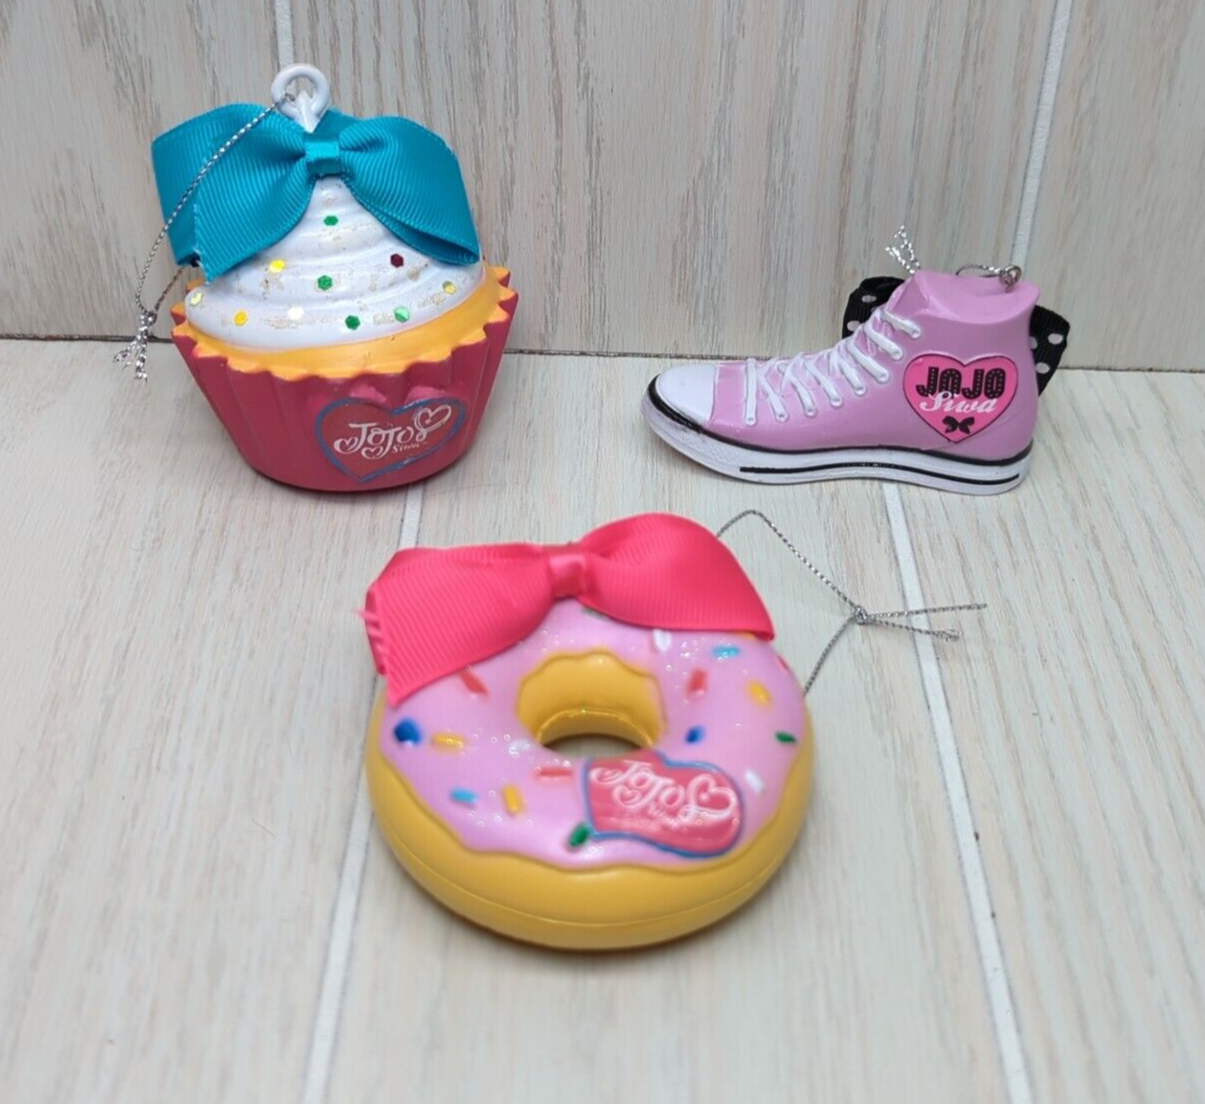 Primary image for Jojo Siwa Lot 3 Christmas Tree Ornaments Donut cupcake High top sneaker shoe bow